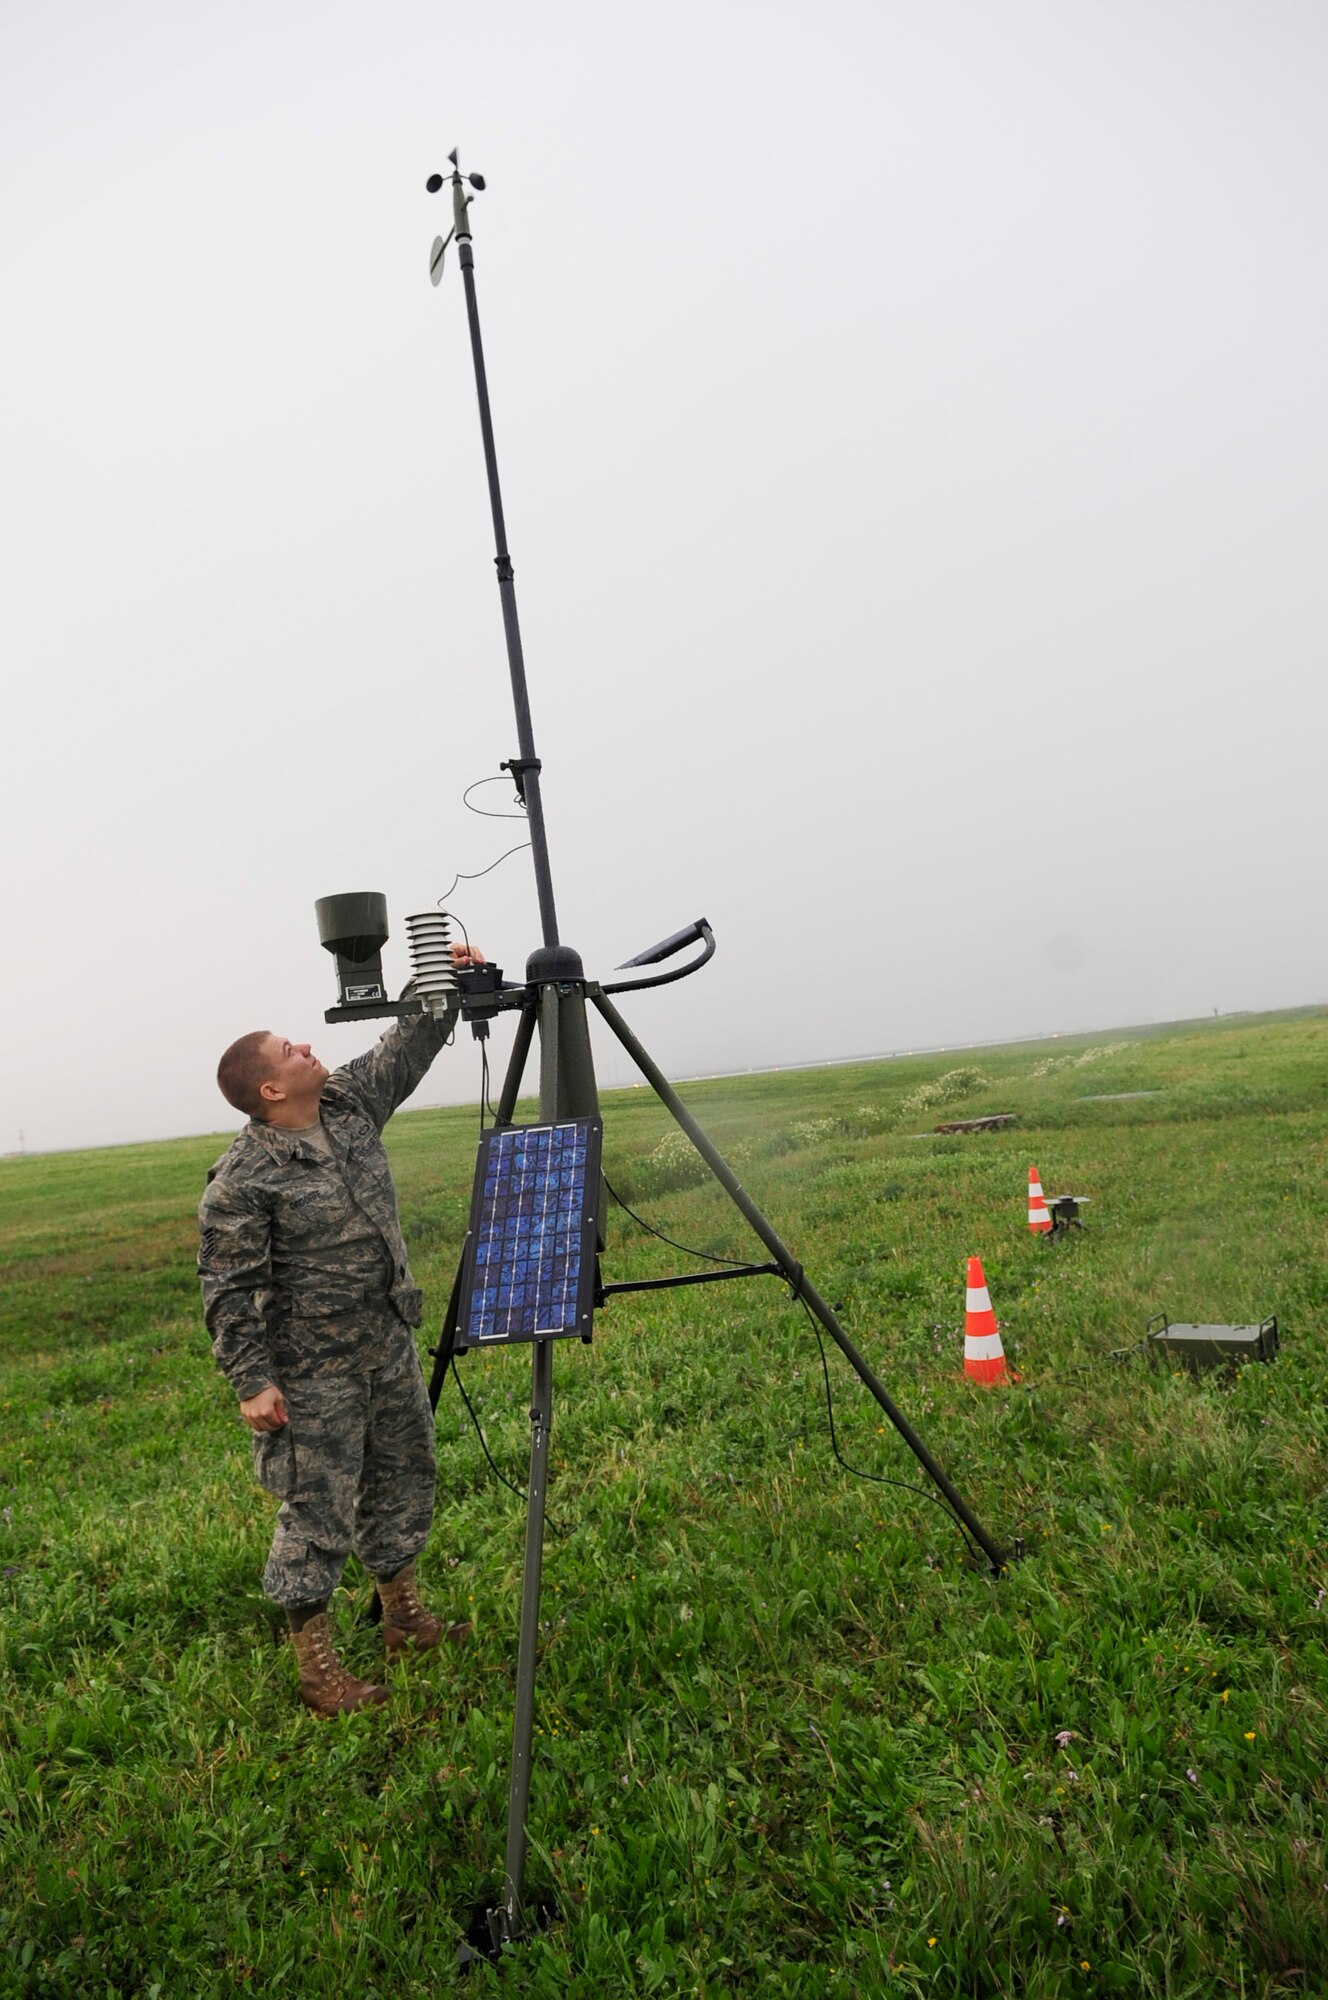 313th AIR EXPEDITIONARY WING (April 3, 2011) -- Tech. Sgt. Matthew Ordorff, 100th Air Refueling Wing weather technician, deployed from Royal Air Force Mildenhall, England, checks a AN/TMQ-53 Tactical Meteorology Sensor Suite in the rain, in support of Operation Unified Protector. Unified Protector is a NATO-led operation in Libya to protect civilians and civilian-populated areas under threat of attack.  (U.S. Air Force photo/Senior Airman Ethan Morgan)